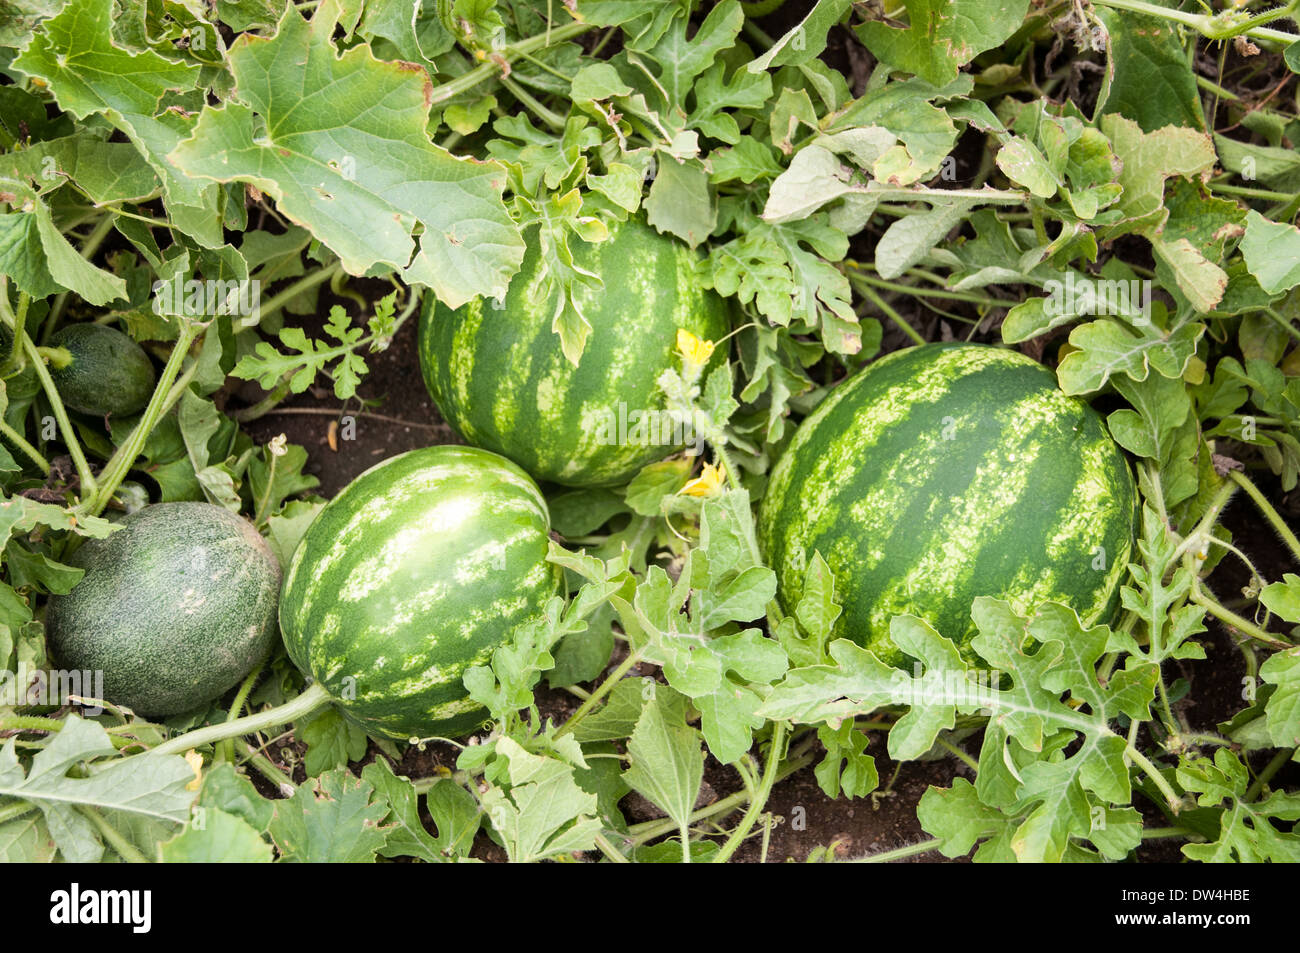 Watermelon And Melon In A Vegetable Garden Stock Photo 67098962